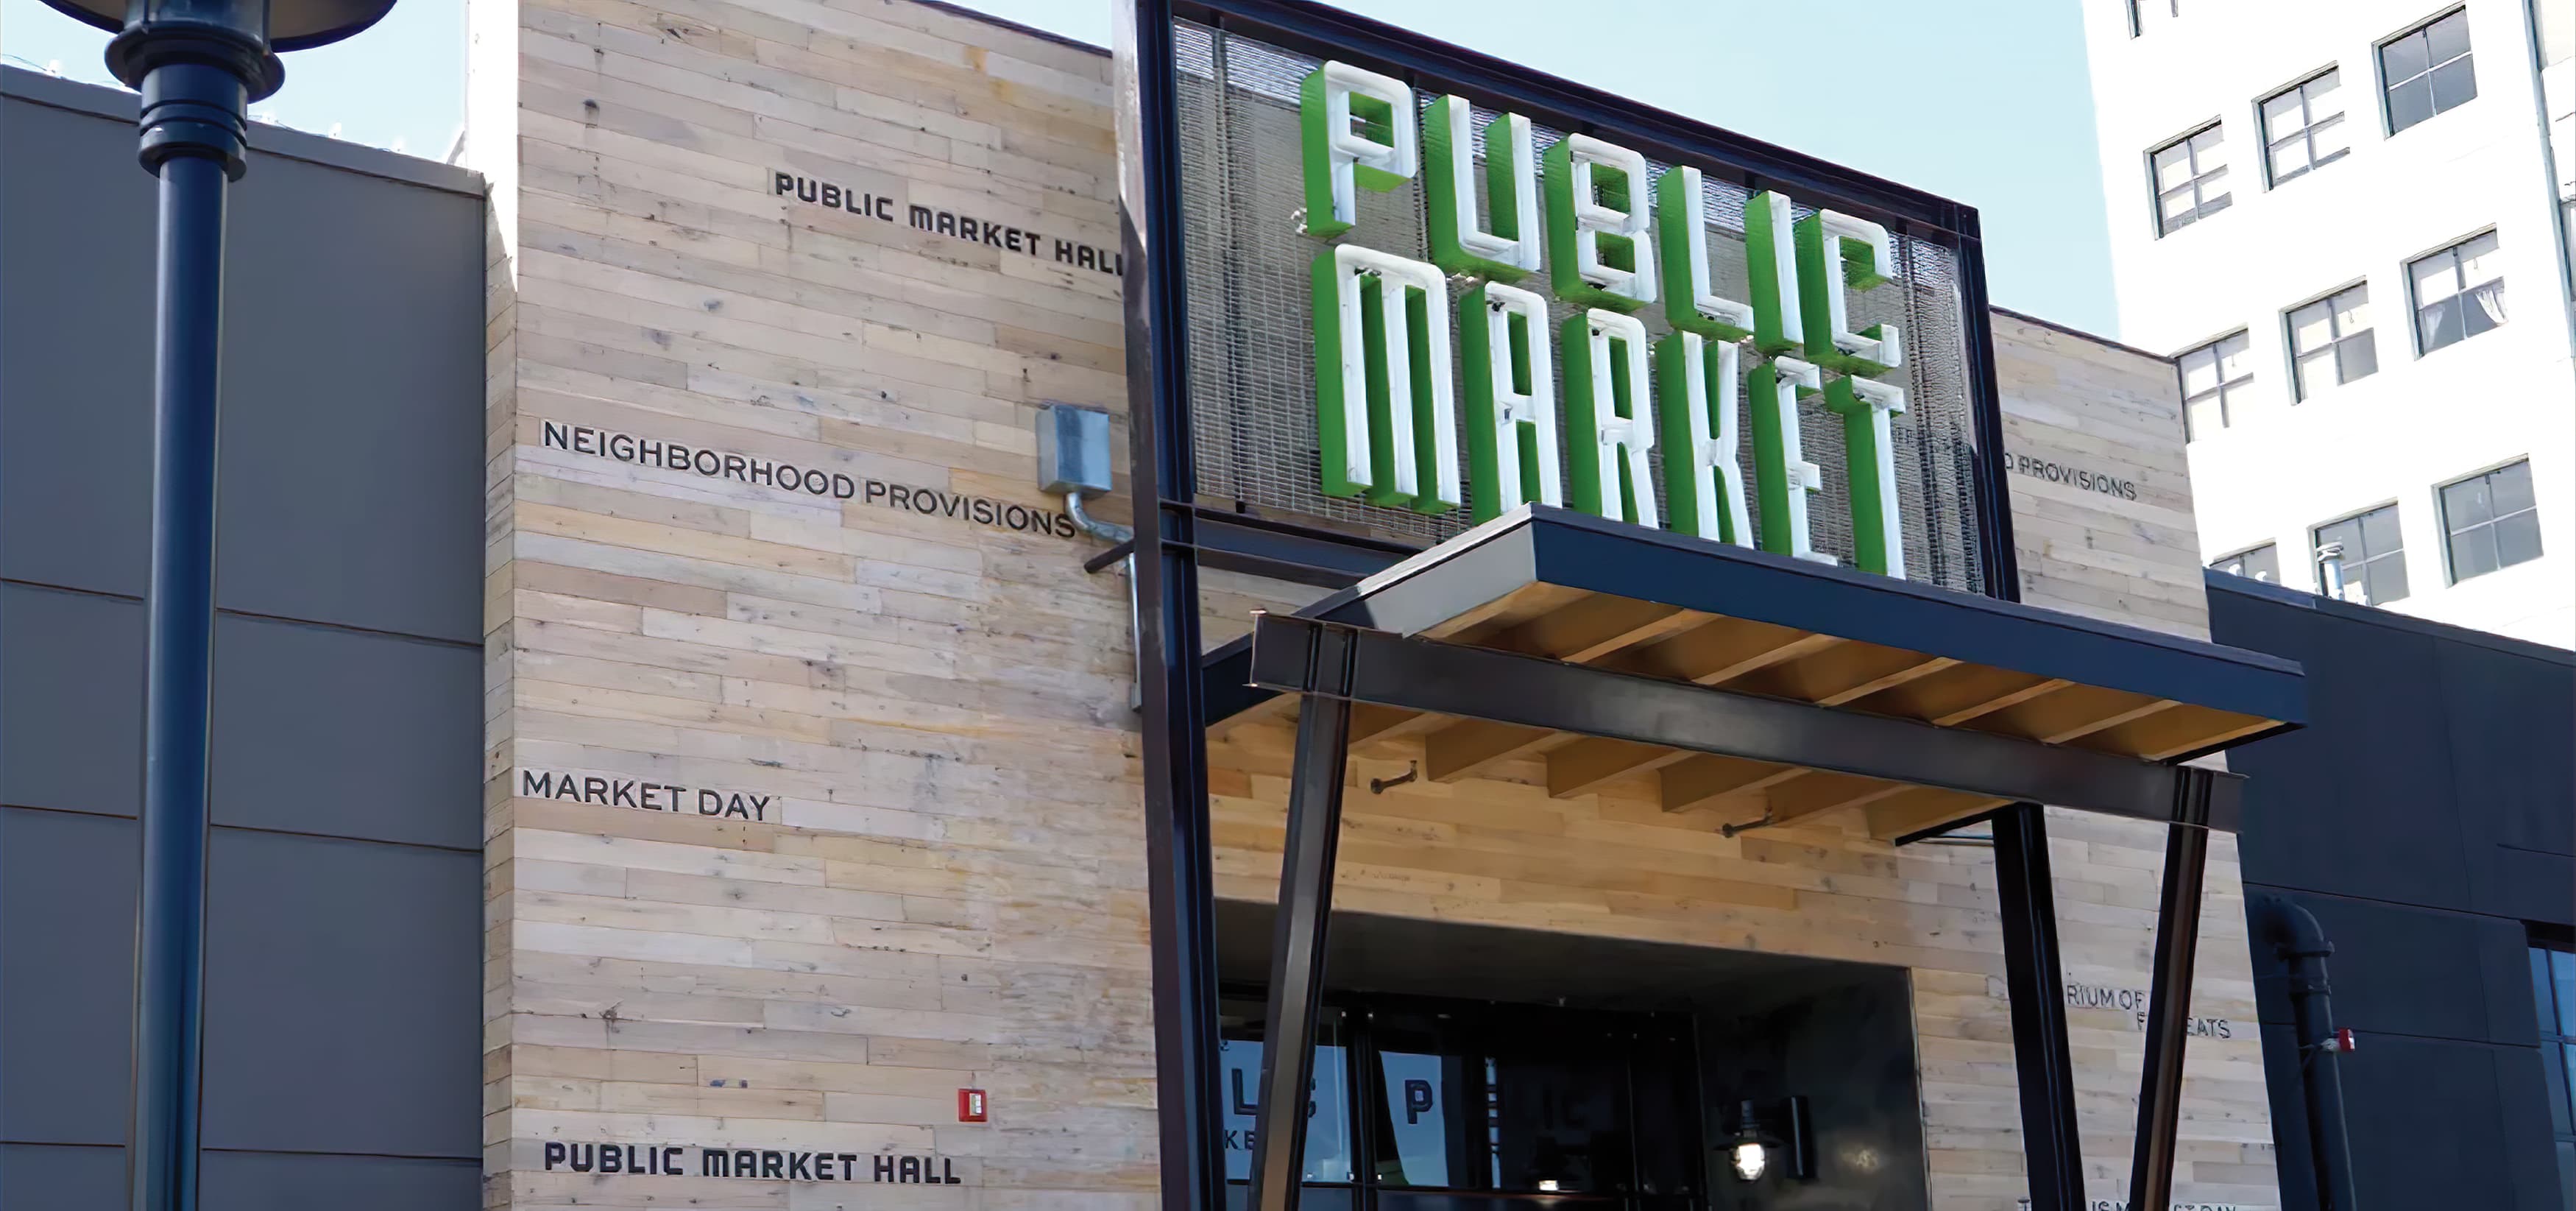 RSM Design worked with TMG Partners to develop signage and wayfinding program for Public Market, a dining and shopping center in San Francisco, California.